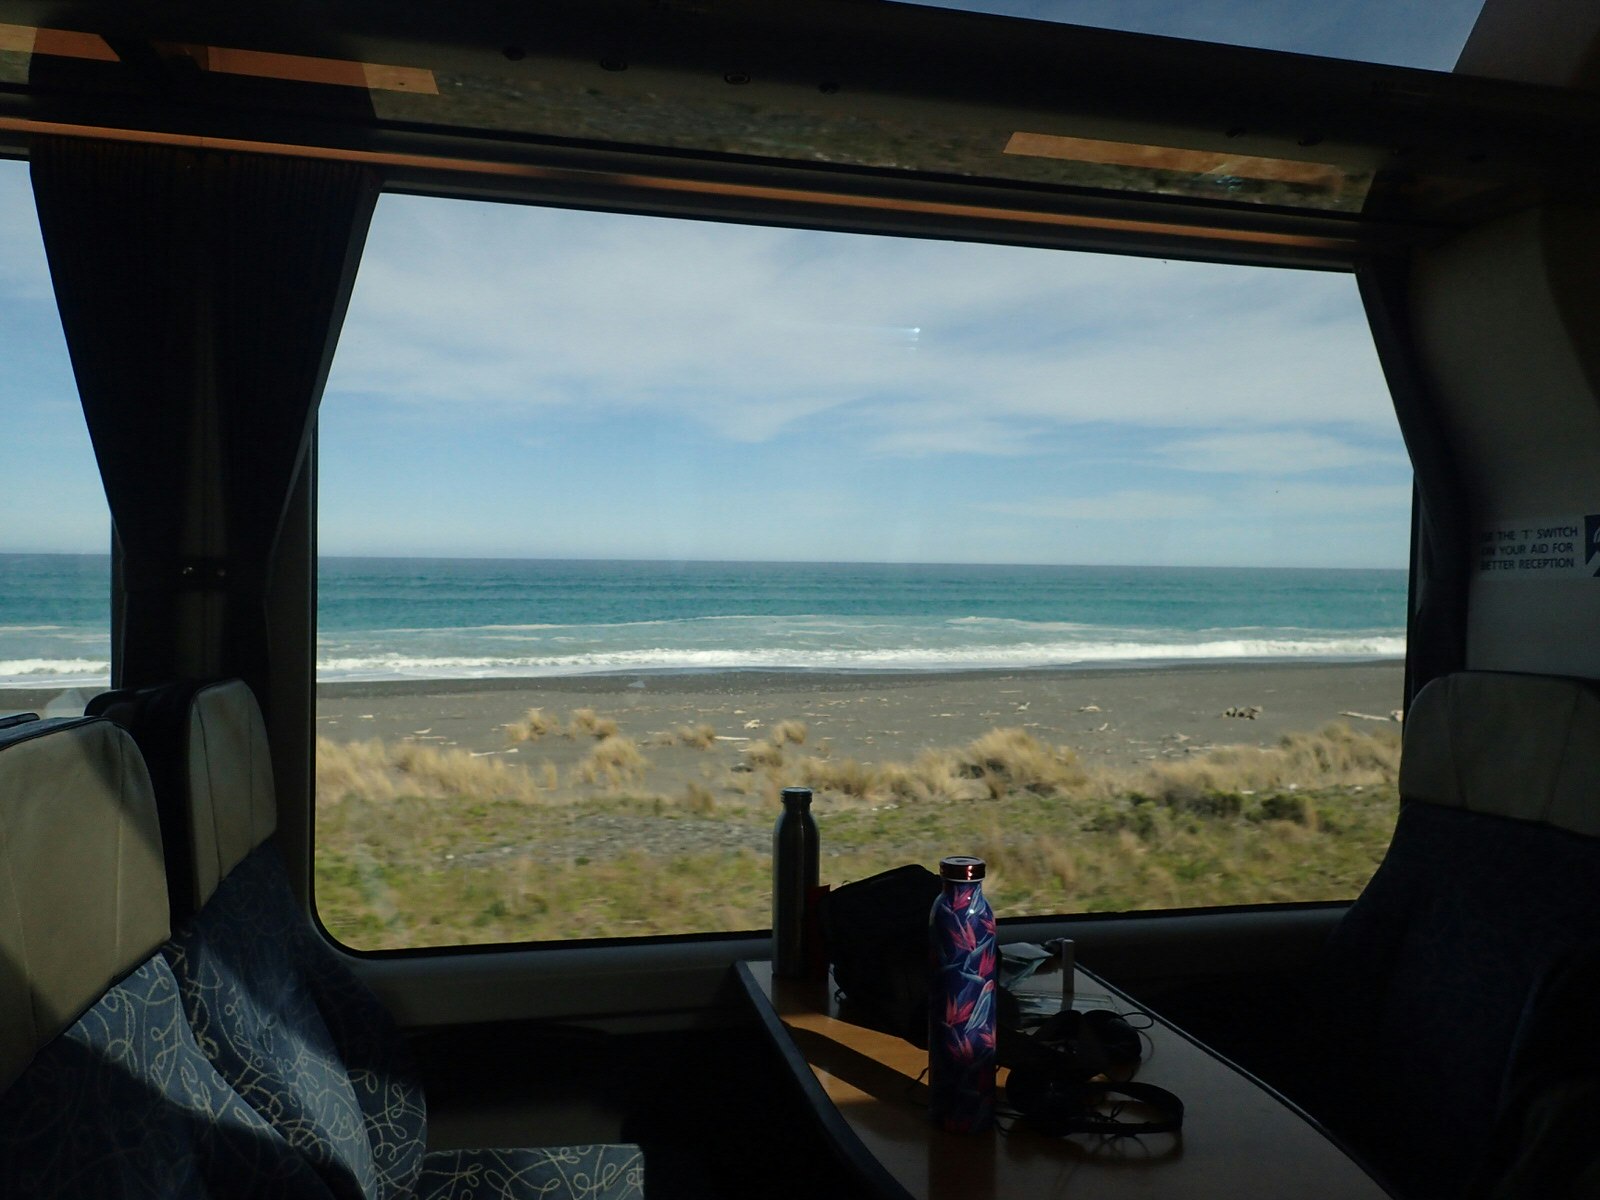 Ocean view from Coastal Pacific train, New Zealand.